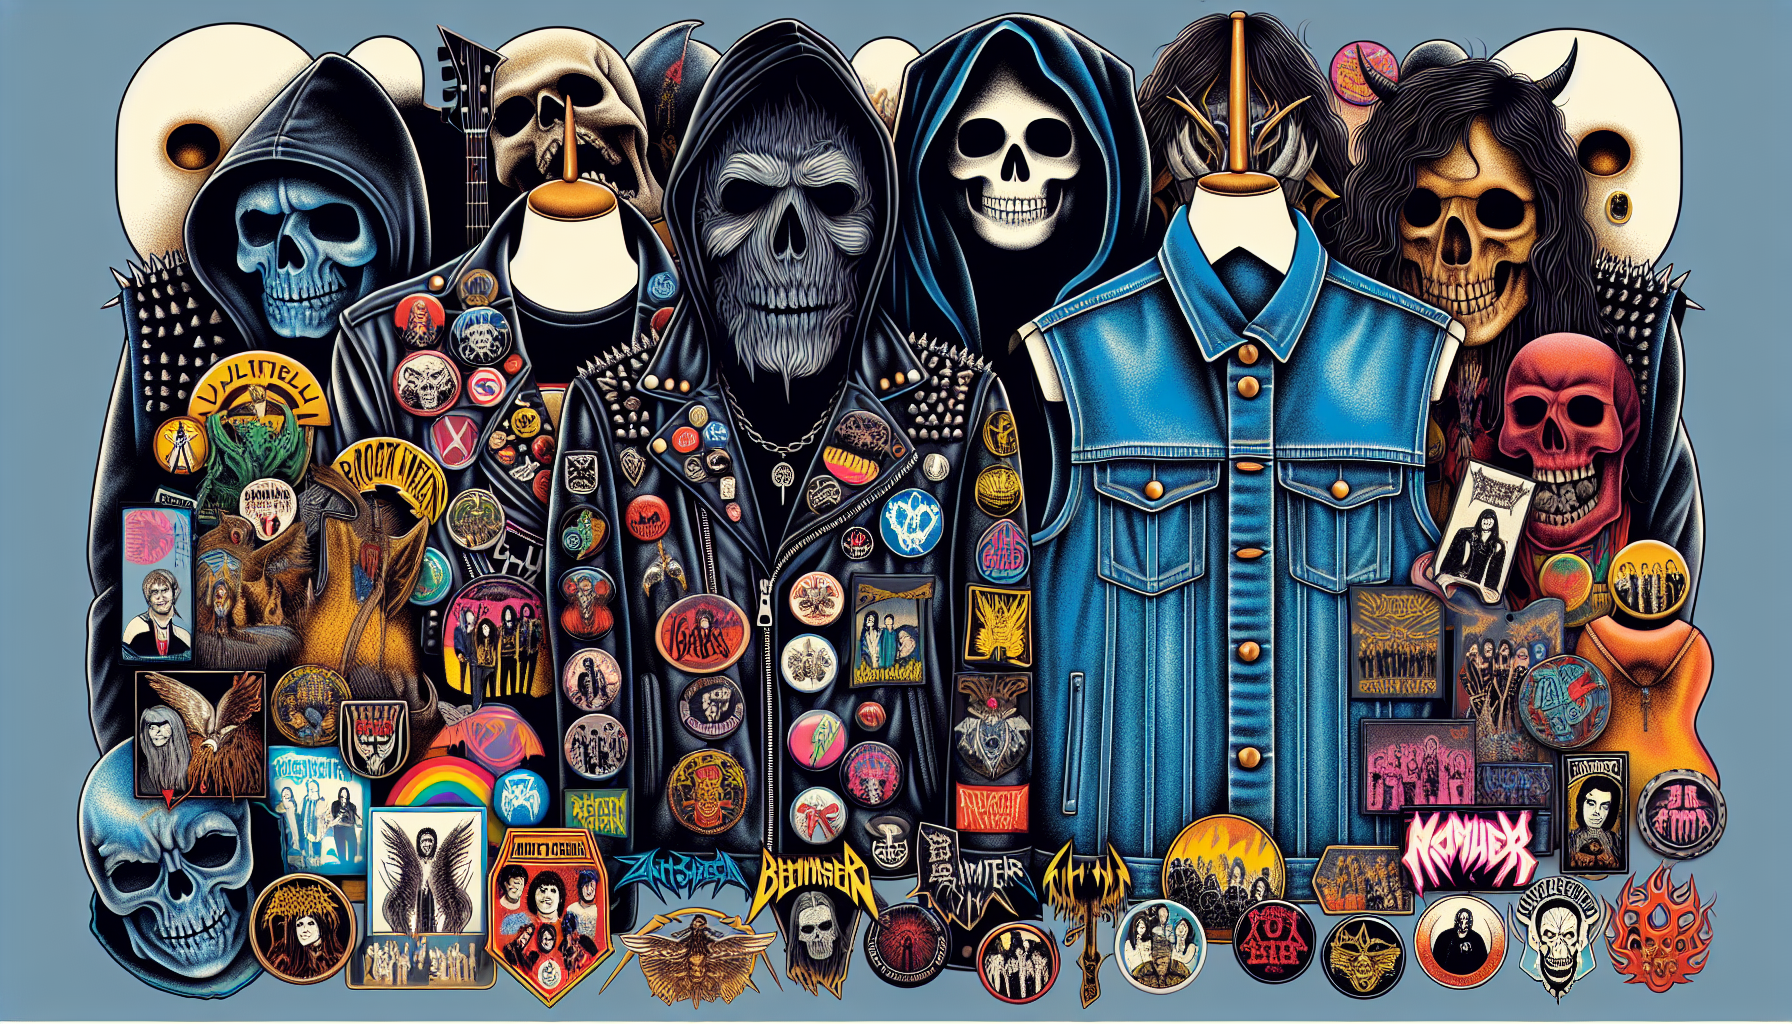 Illustration of unique band merch collections for different music genres